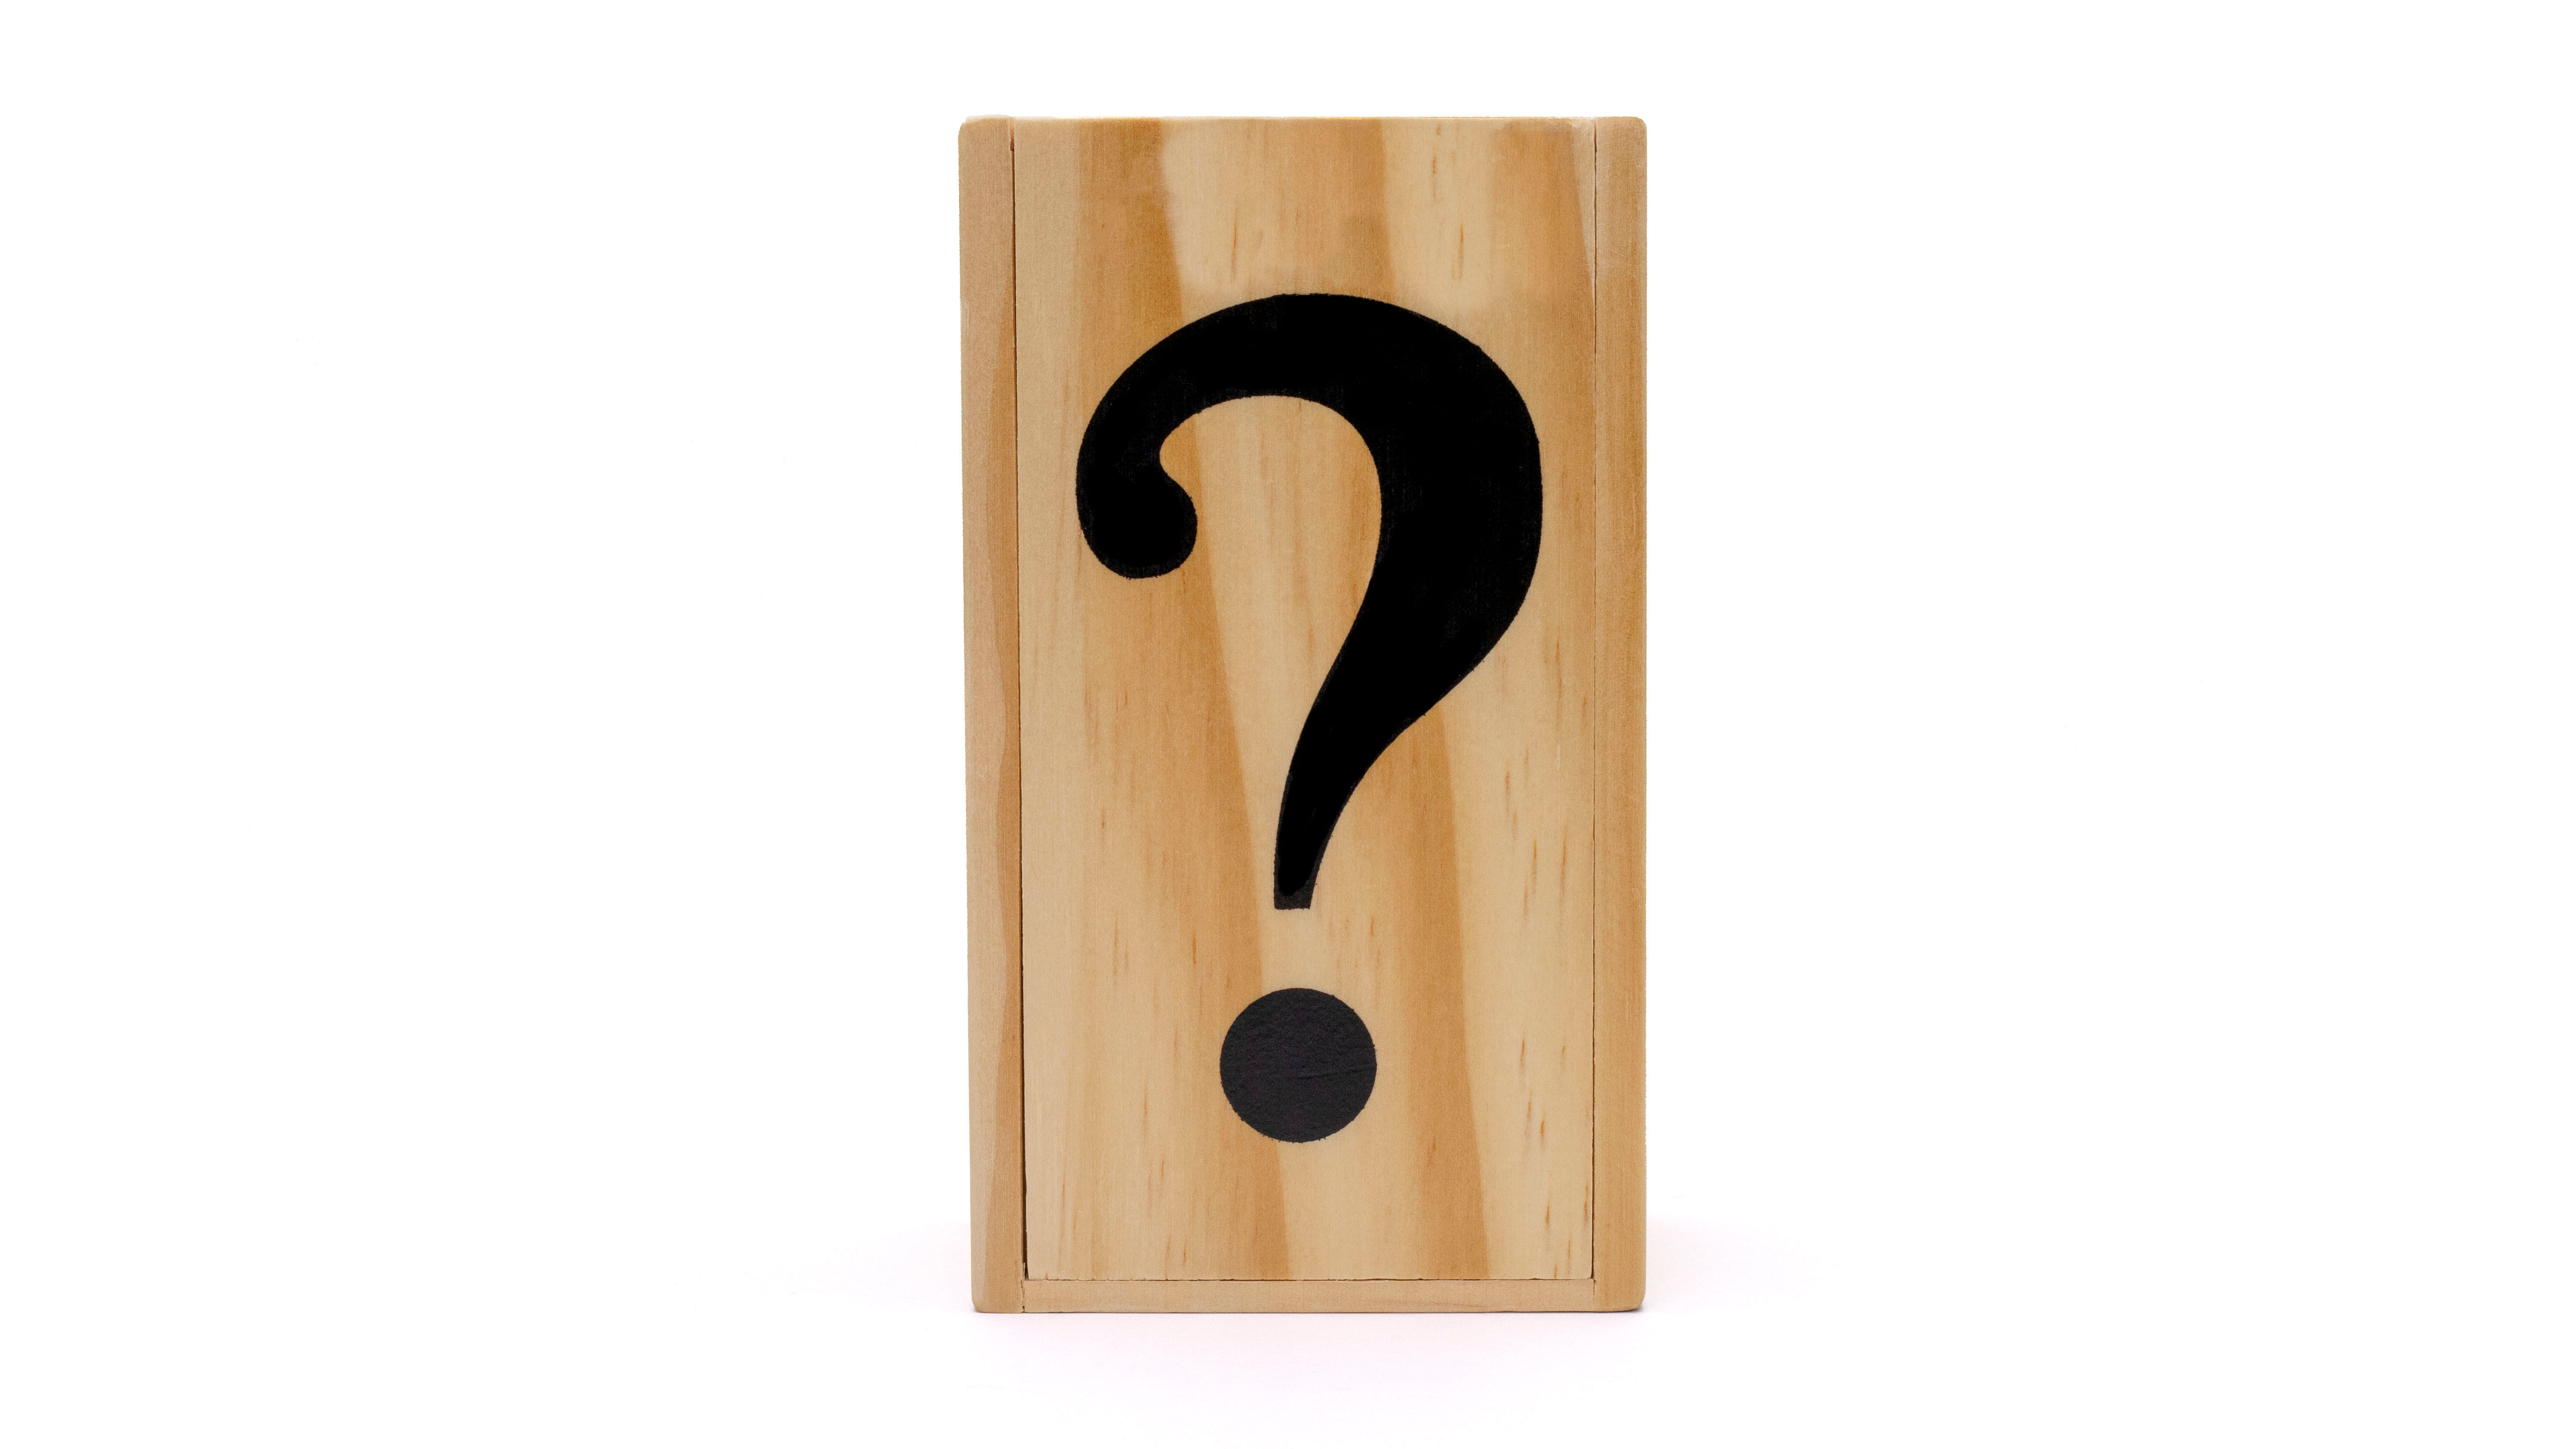 mystery chest puzzle box with question mark logo and solution